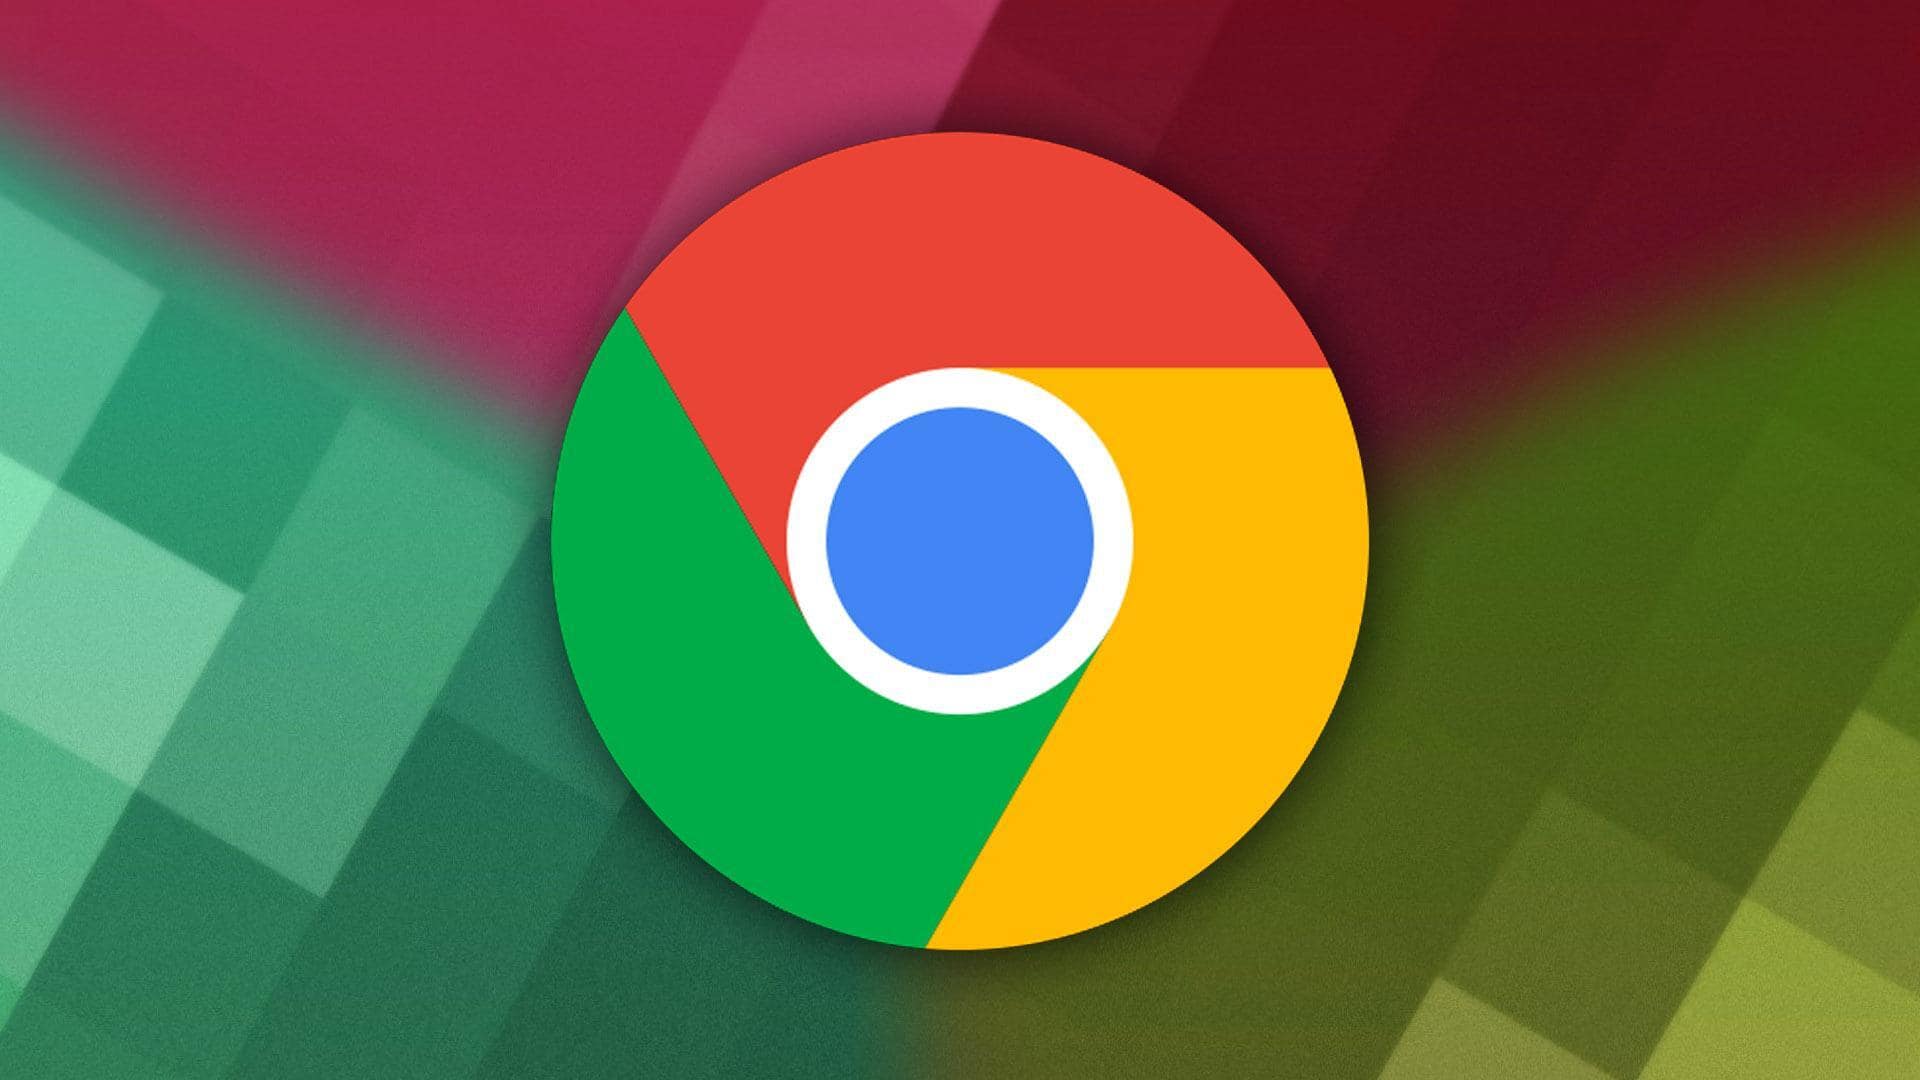 Google enhances multitasking experience with minimized in-app Chrome tabs